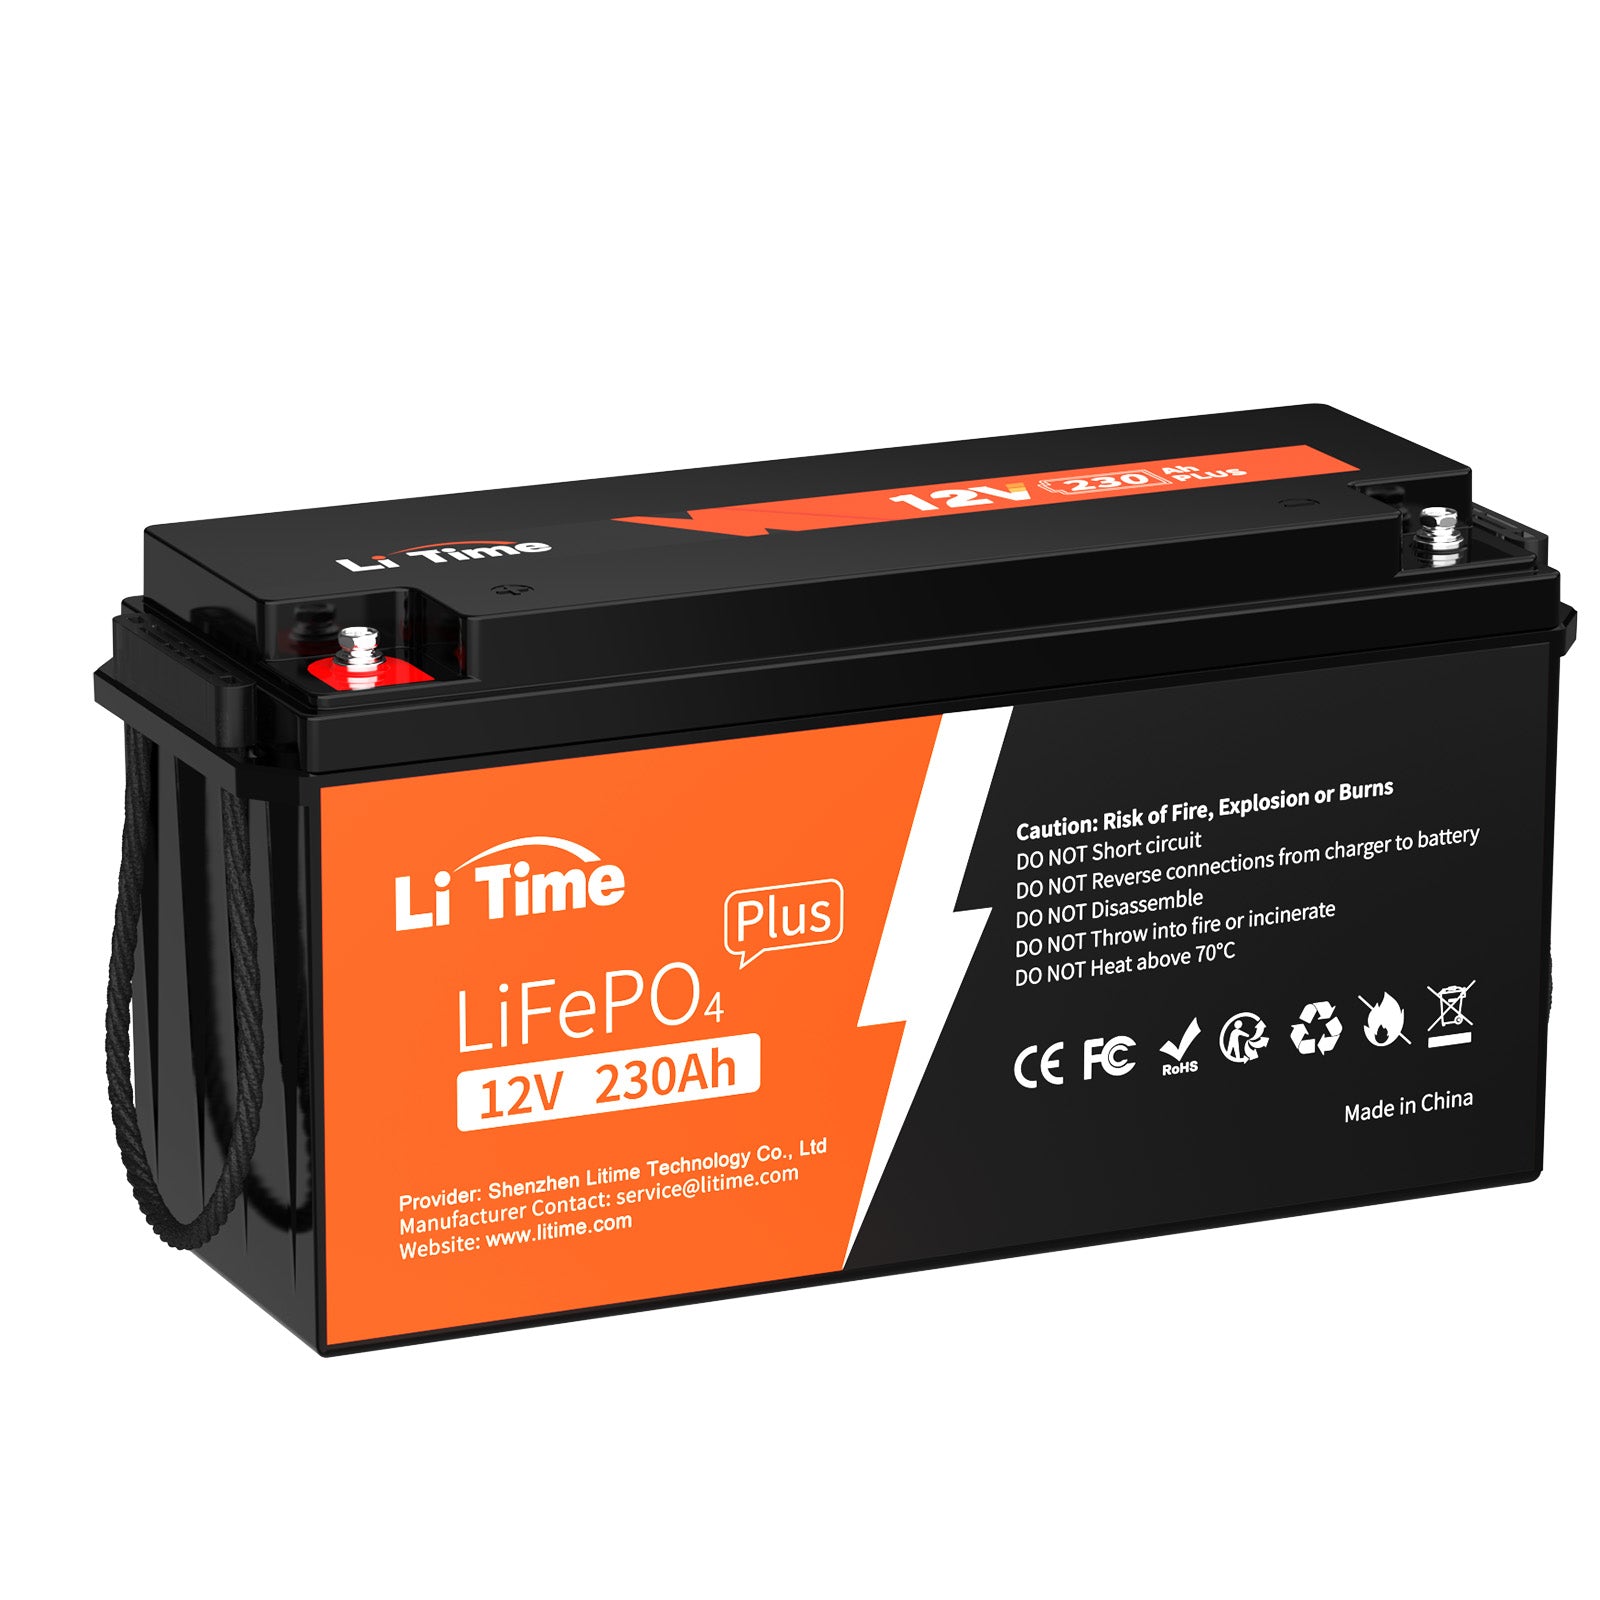 LiTime 12V 200Ah Plus LiFePO4 Lithium Battery, Built-in 200A BMS, 2560W Load Power